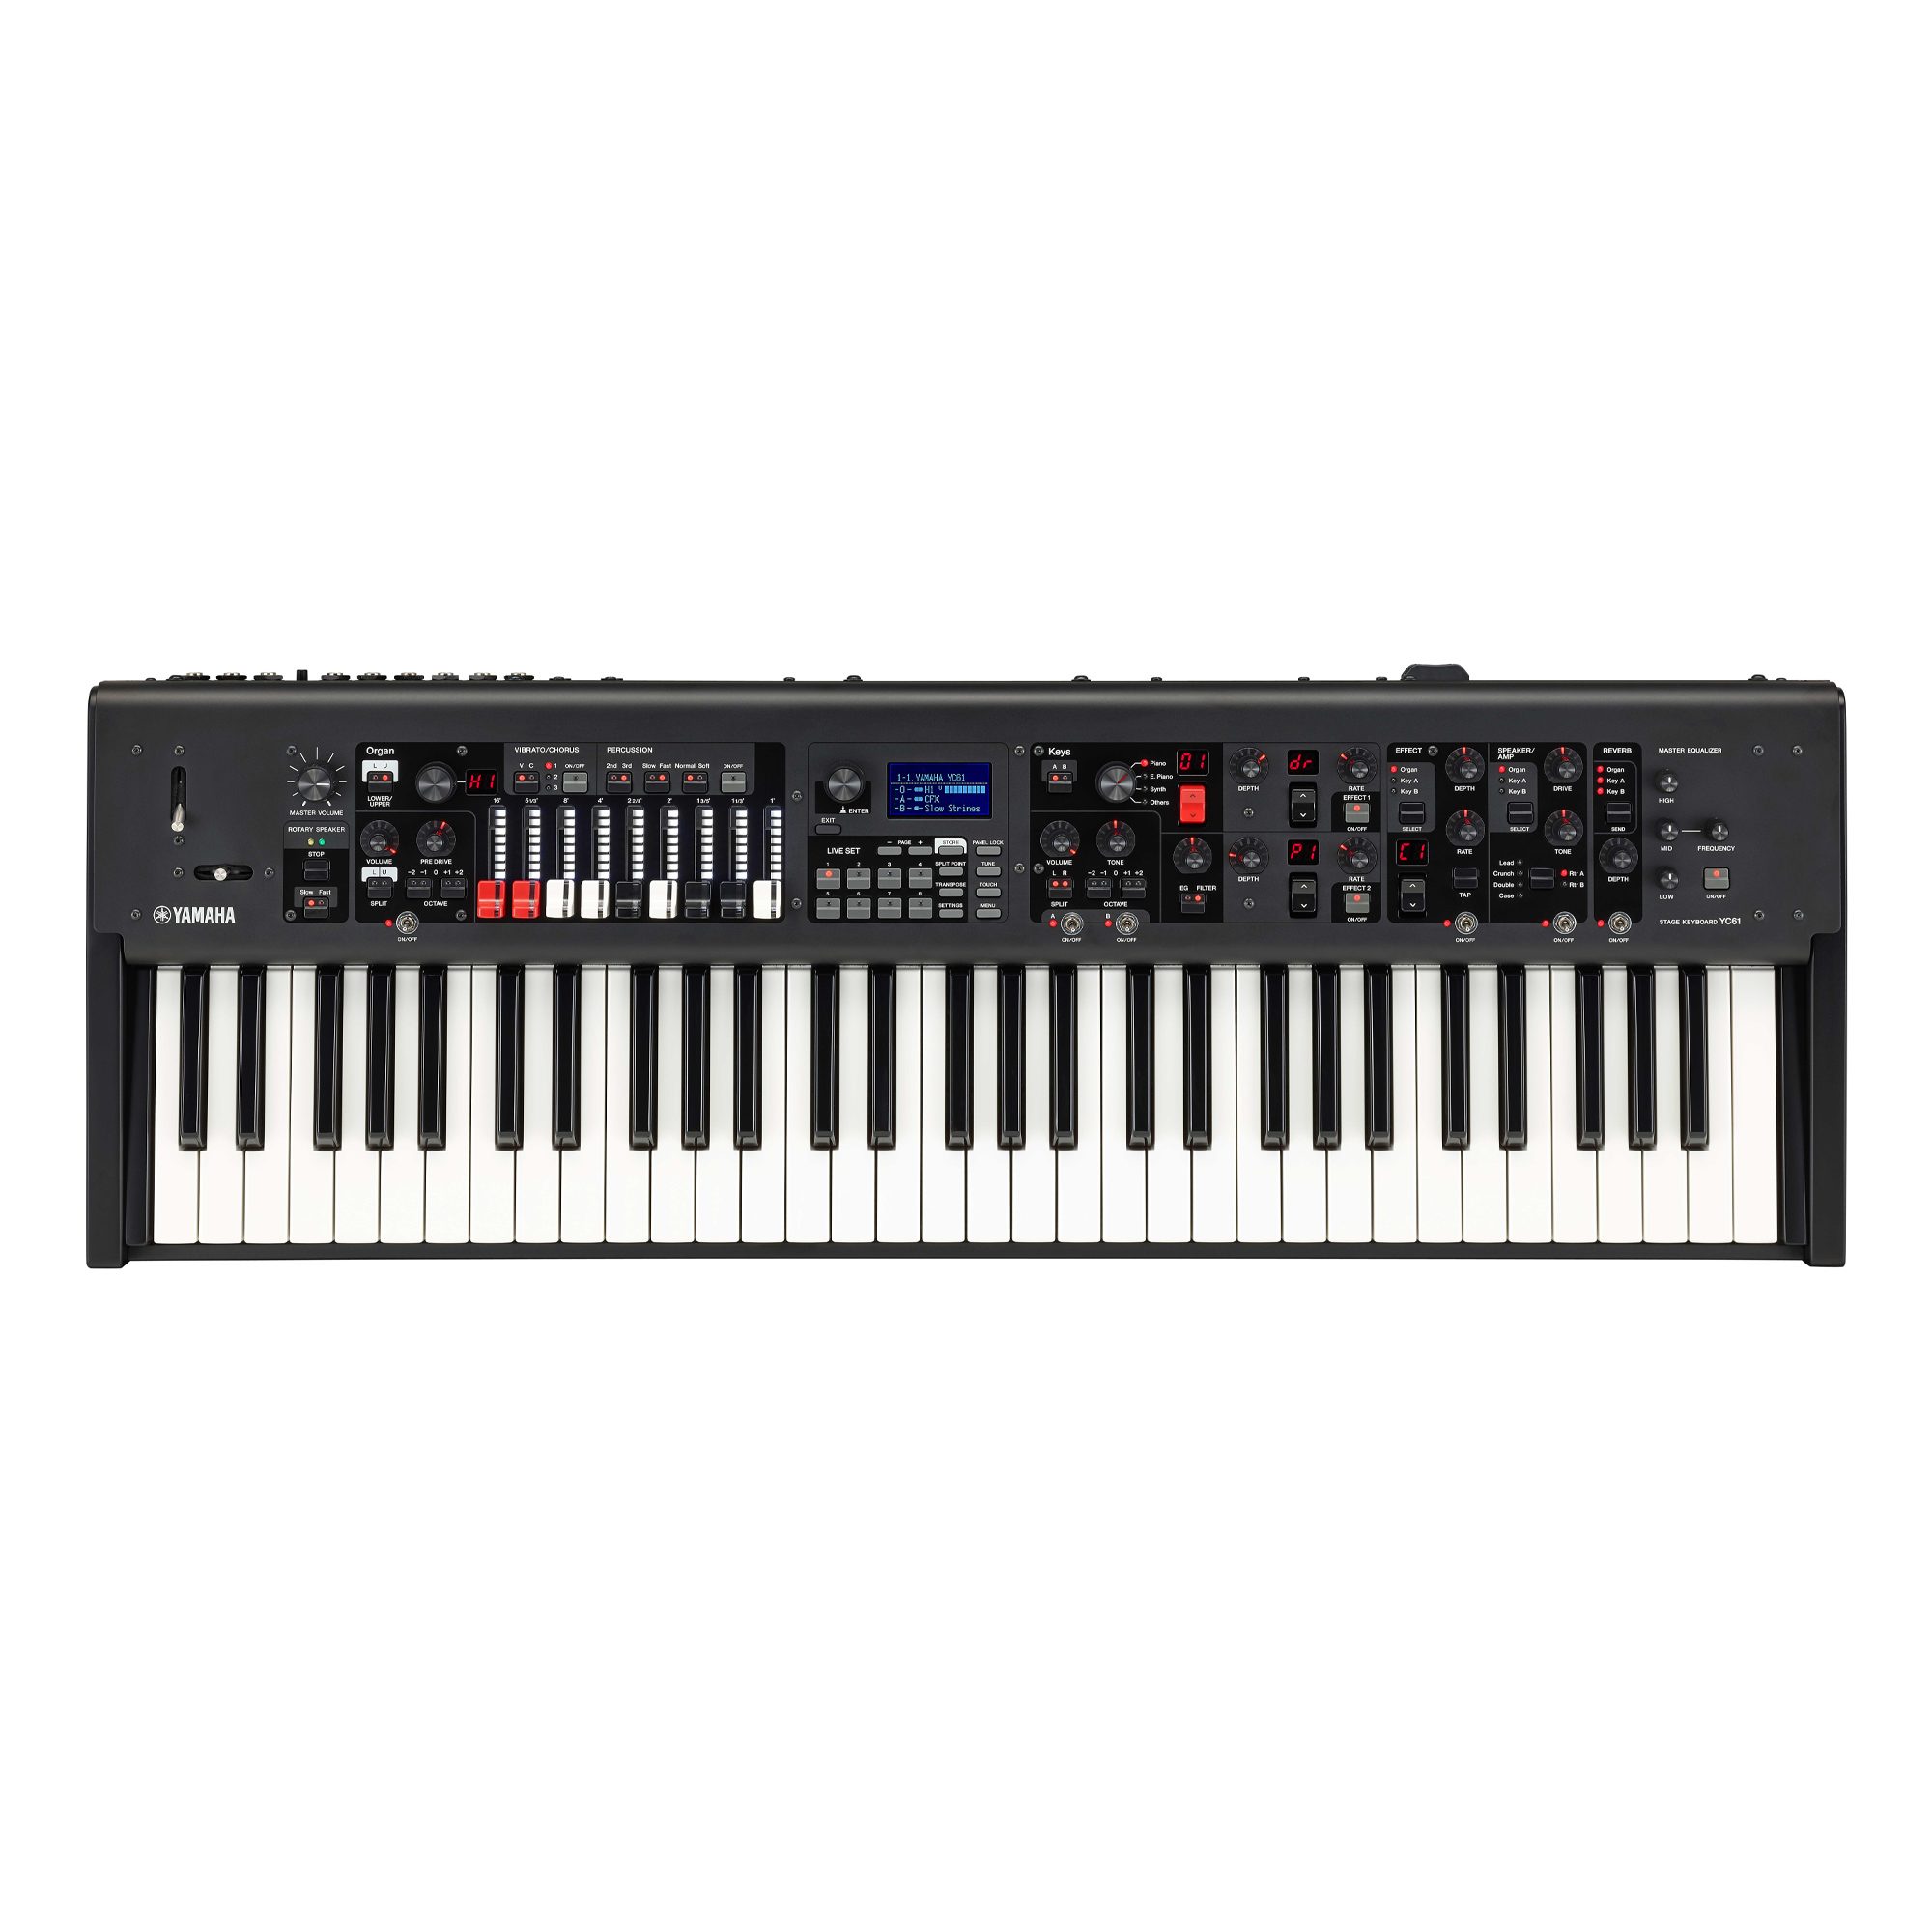 YC Series – YC61, YC73 and YC88 - Overview - Stage Keyboards